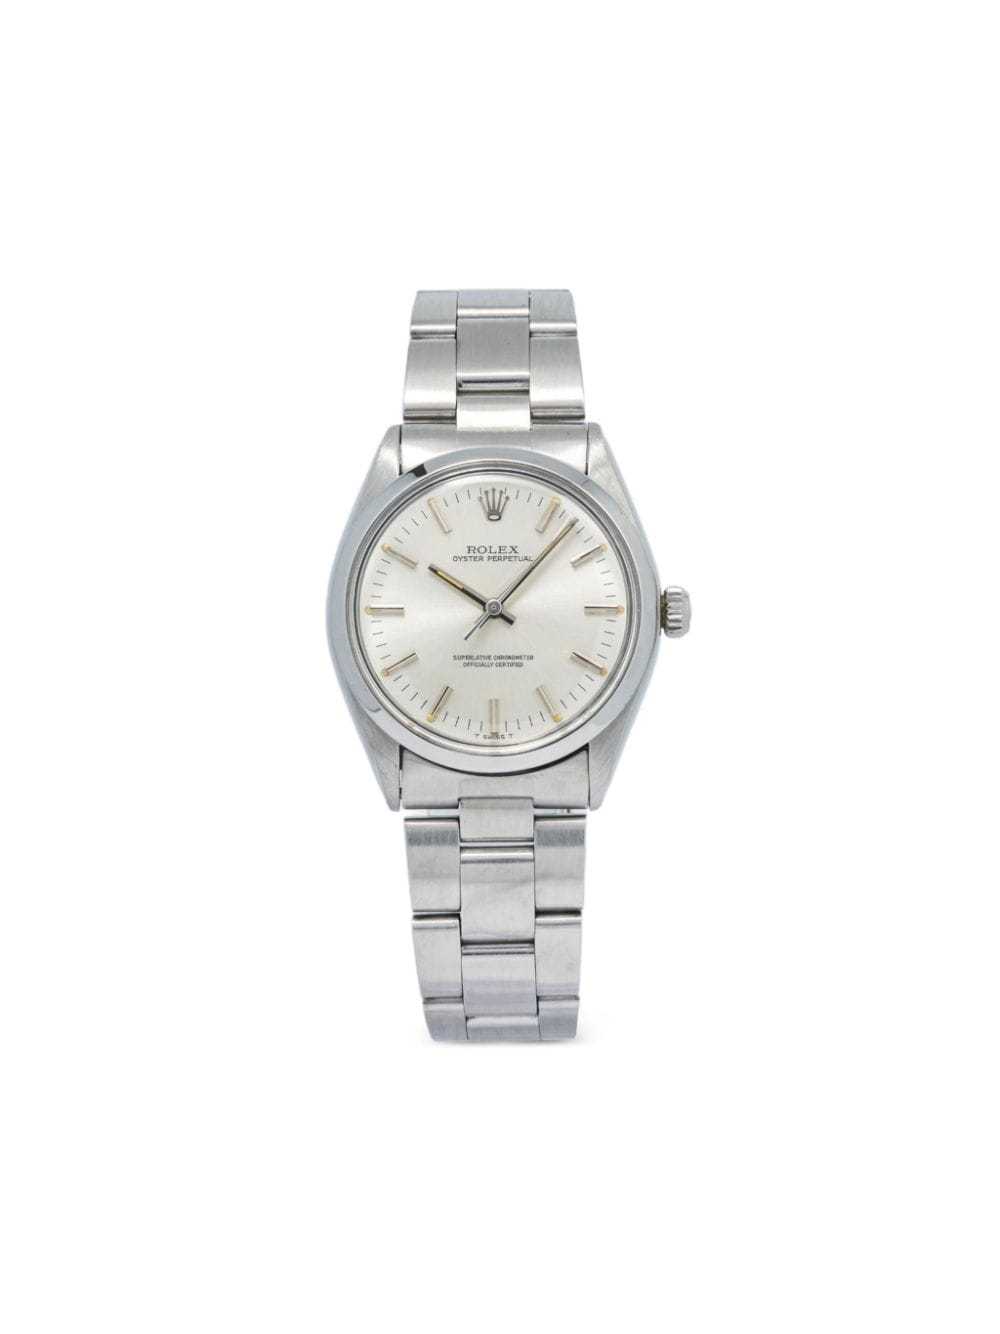 Rolex pre-owned Oyster Perpetual 34mm - White - image 1